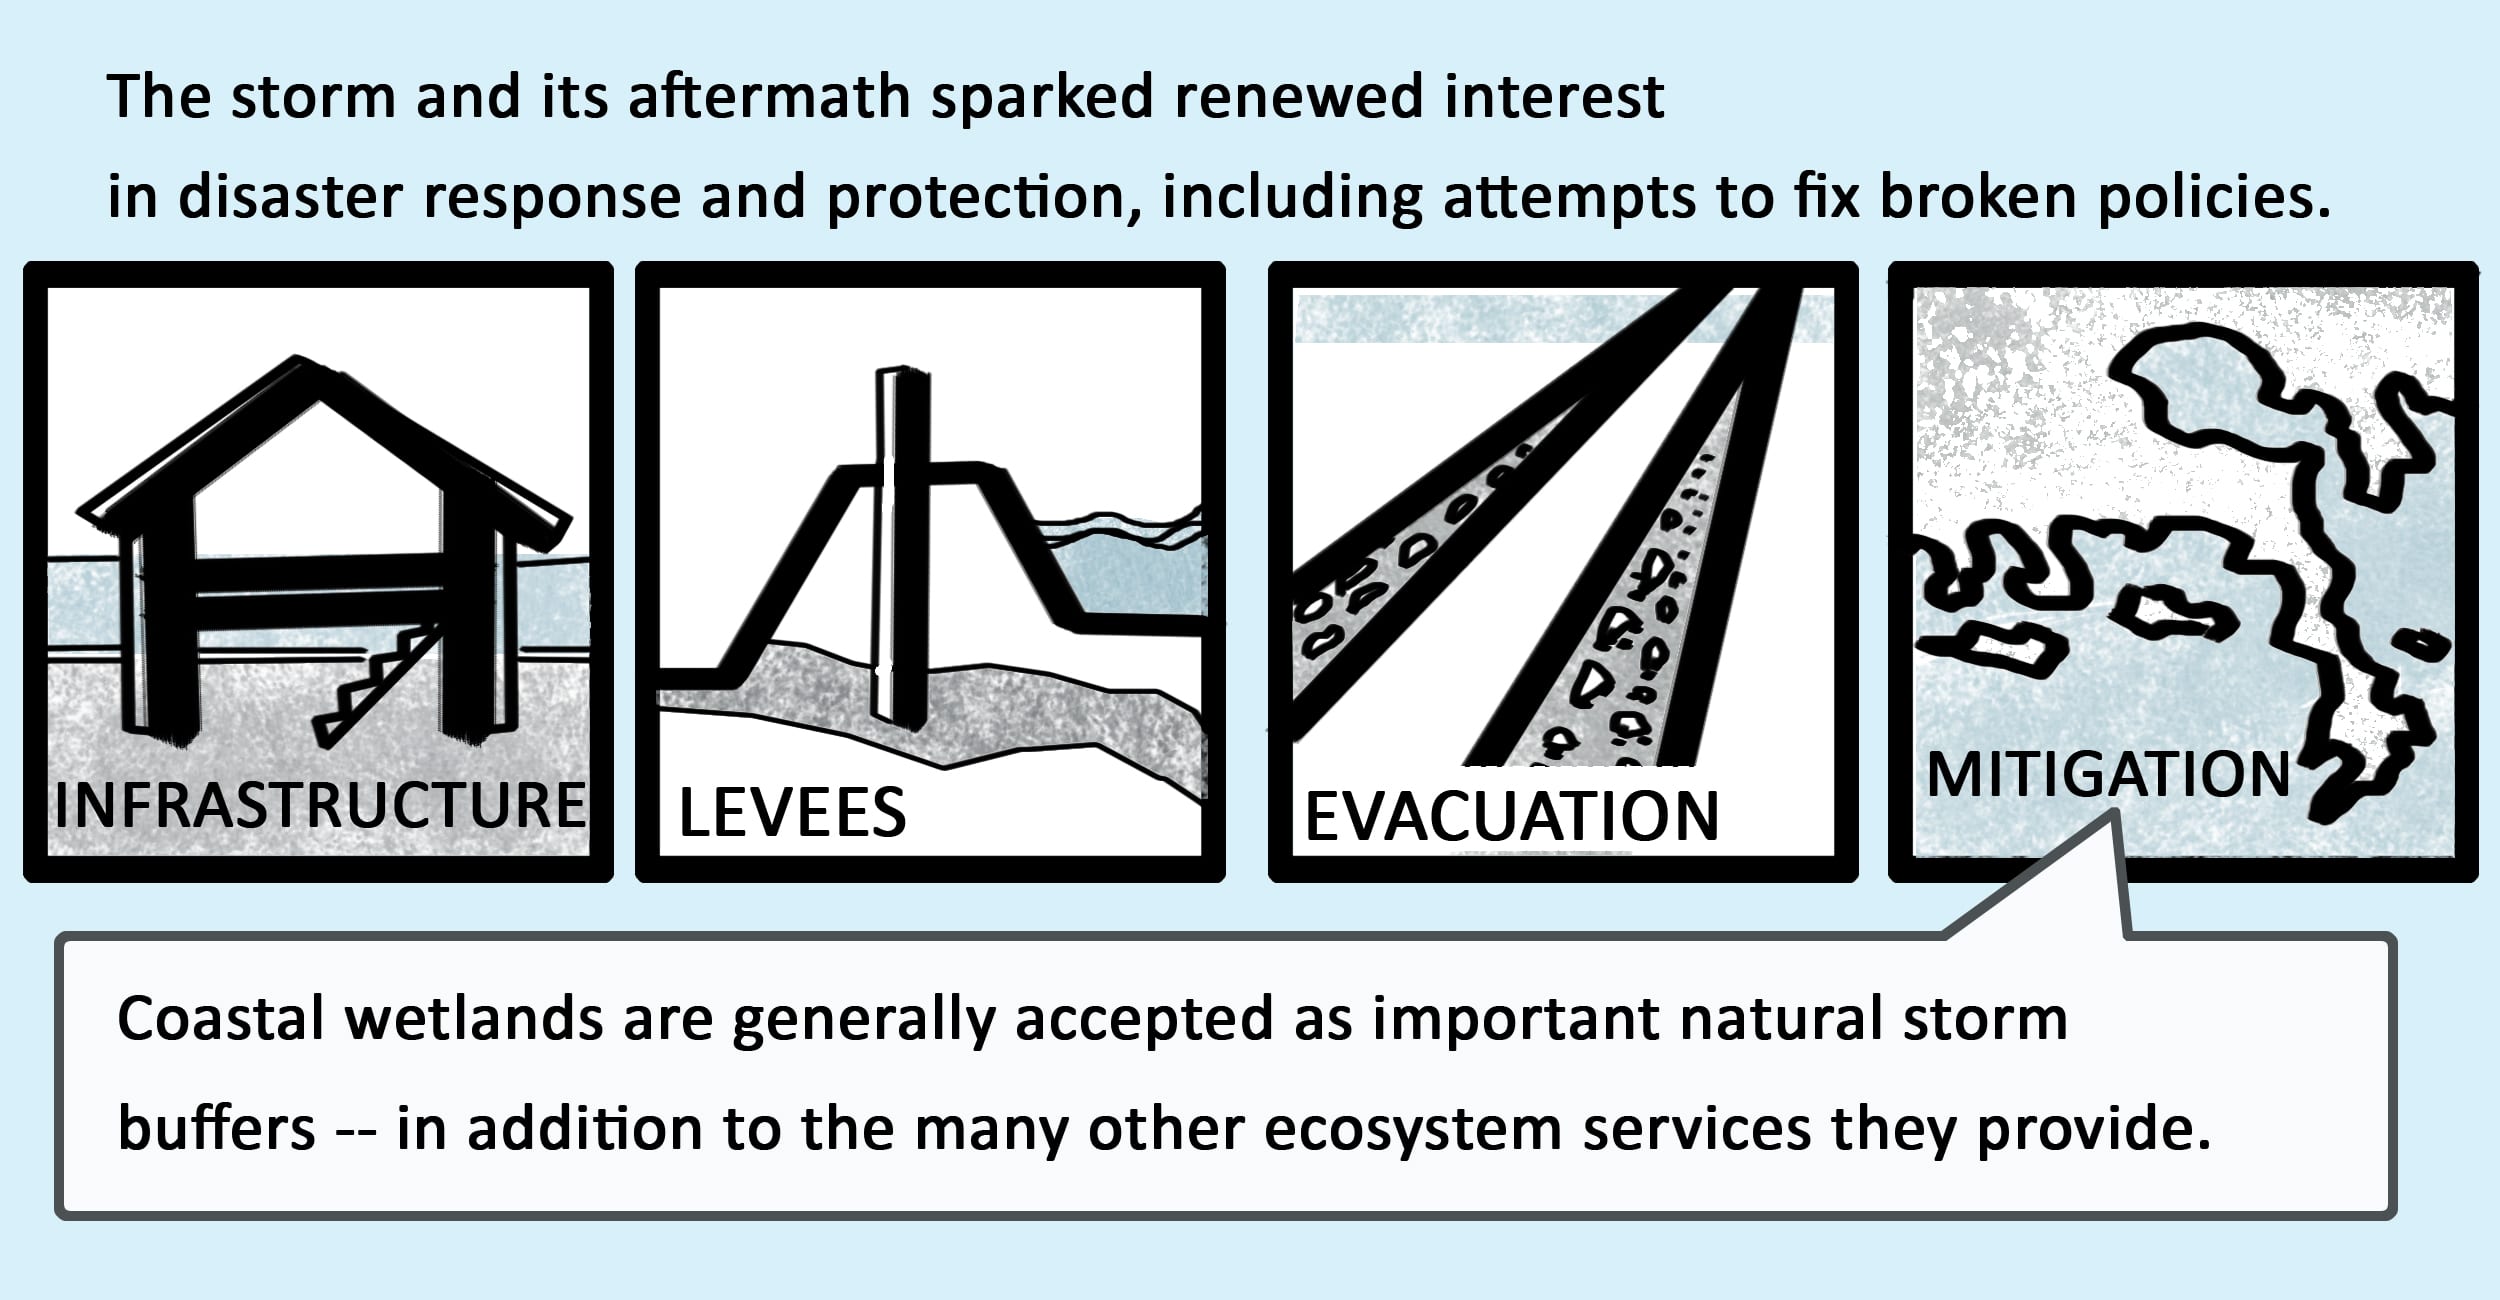 The storm and its aftermath sparked renewed interest in disaster response and protection, including attempts to fix broken policies. Coastal wetlands are generally accepted as important natural storm buffers-- in addition to the many other ecosystem services they provide.